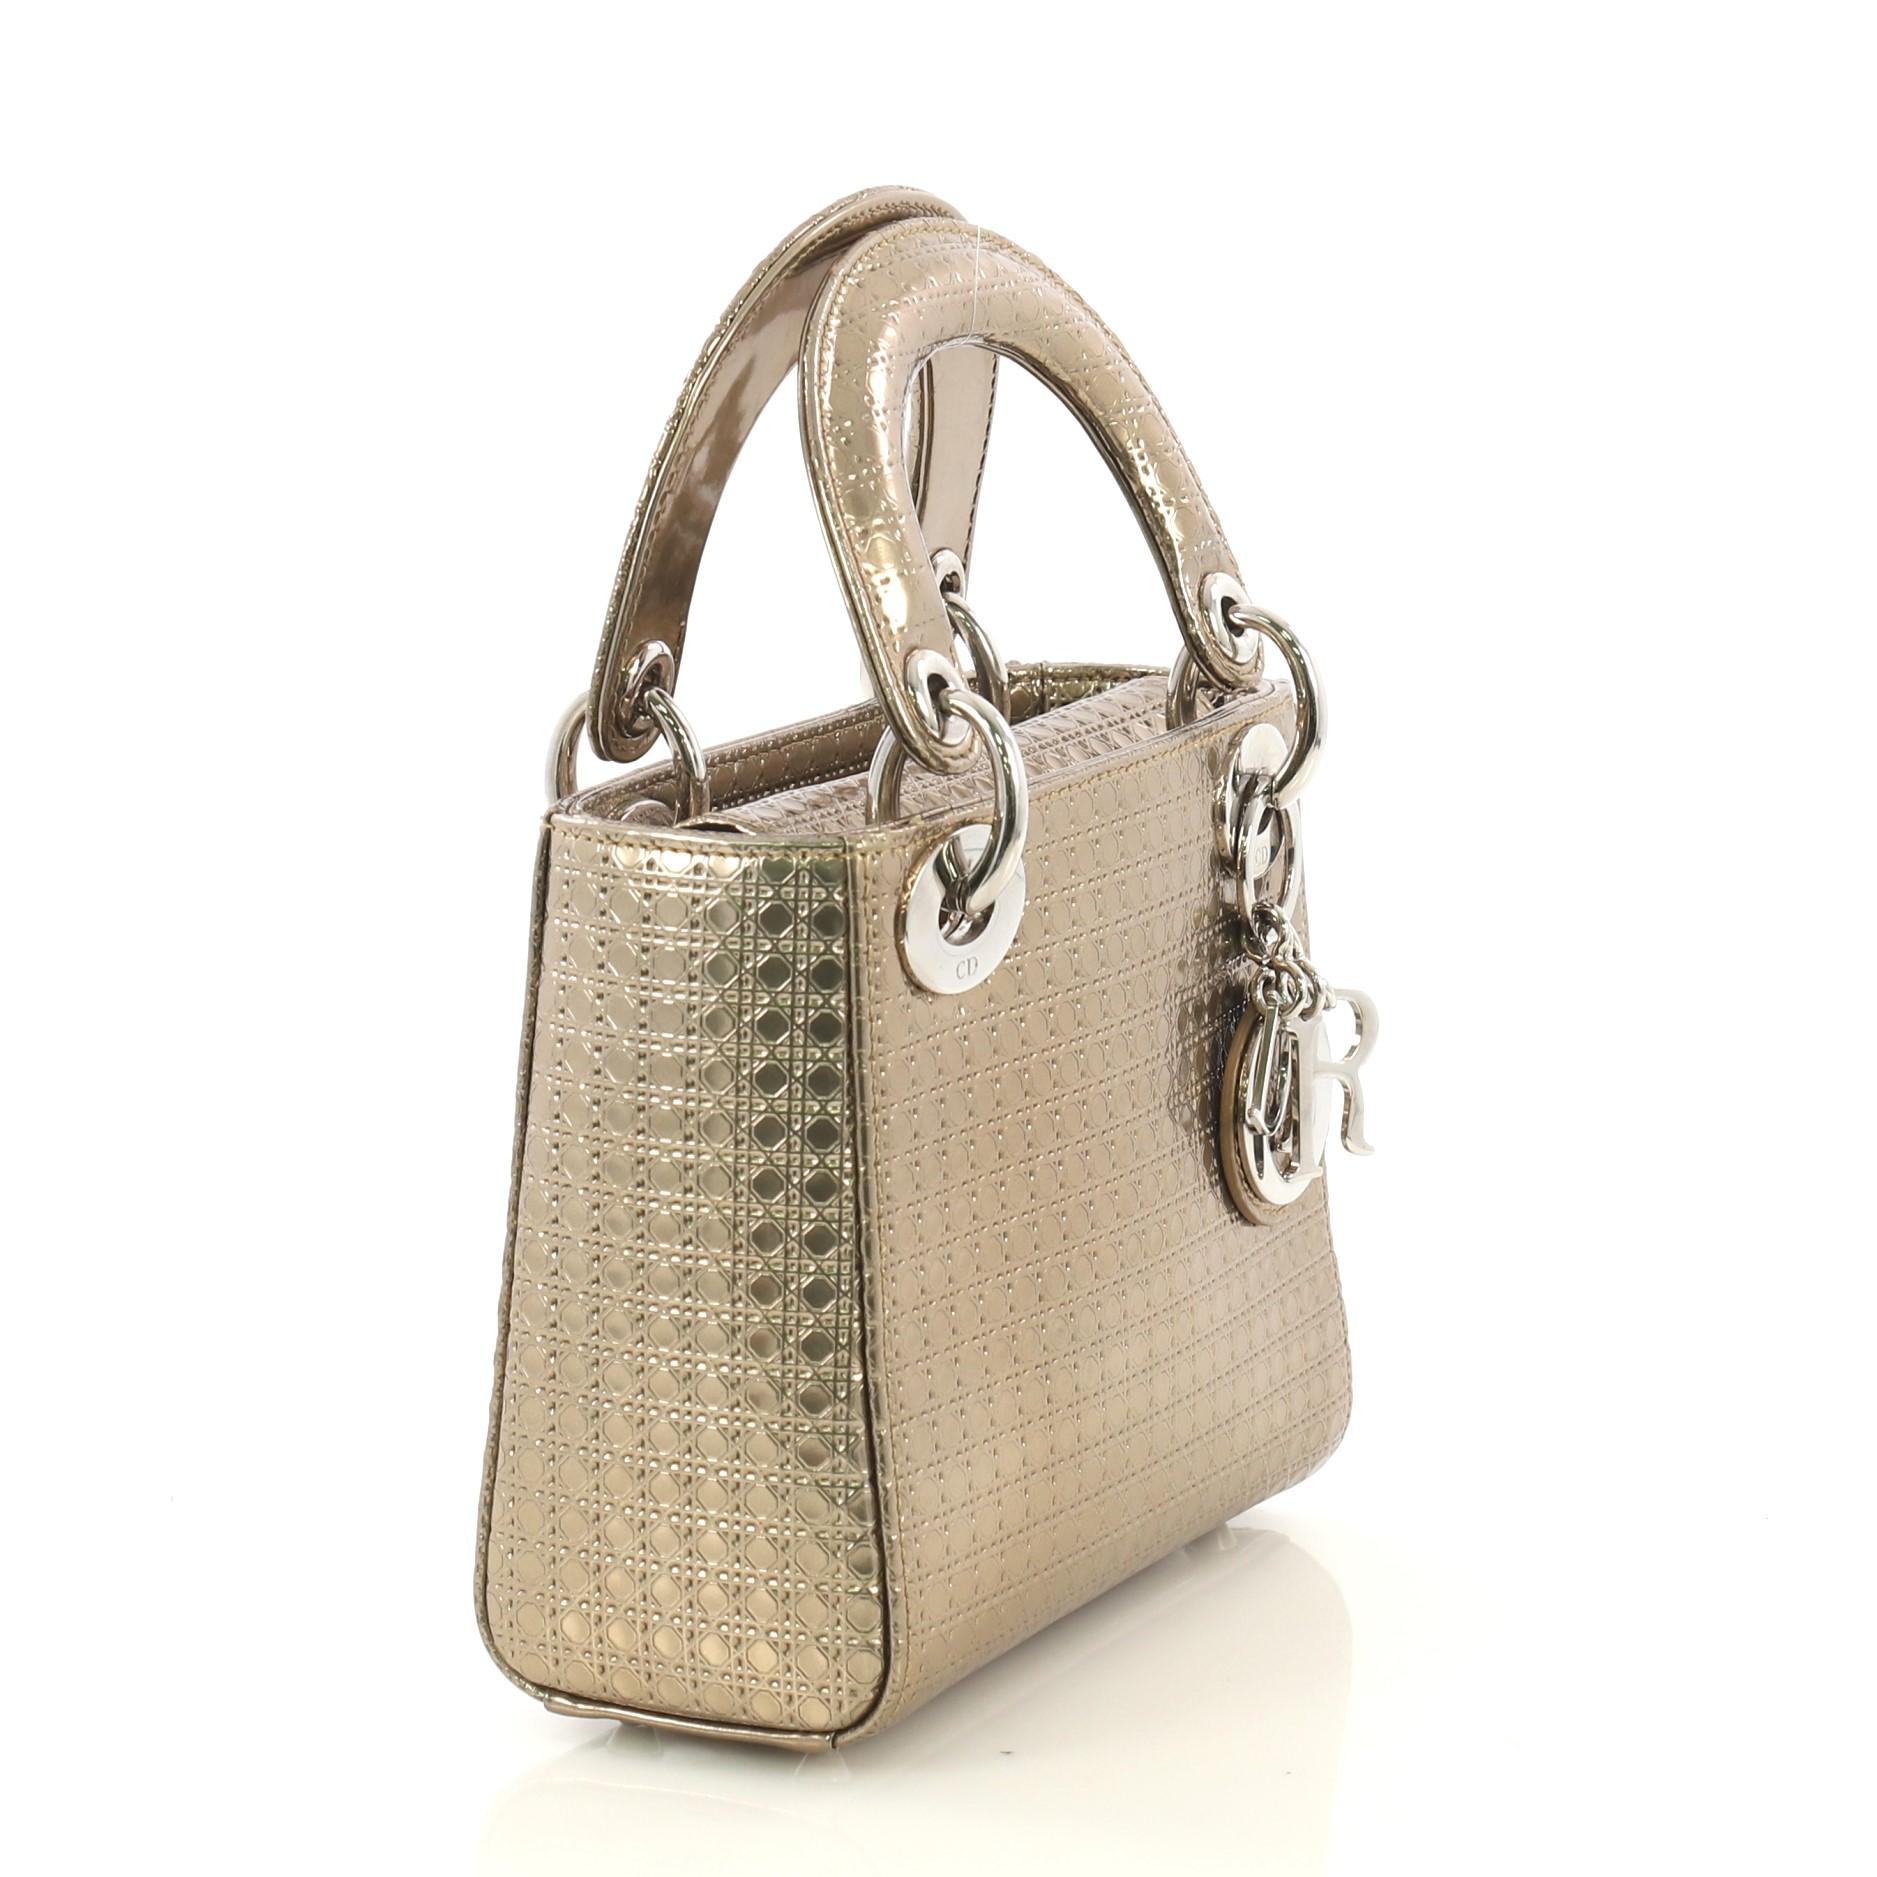 This Christian Dior Lady Dior Handbag Micro Cannage Perforated Calfskin Micro, crafted from gold cannage perforated calfskin leather, features short dual handles with Dior charms and silver-tone hardware. Its flap top closure opens to a gray leather